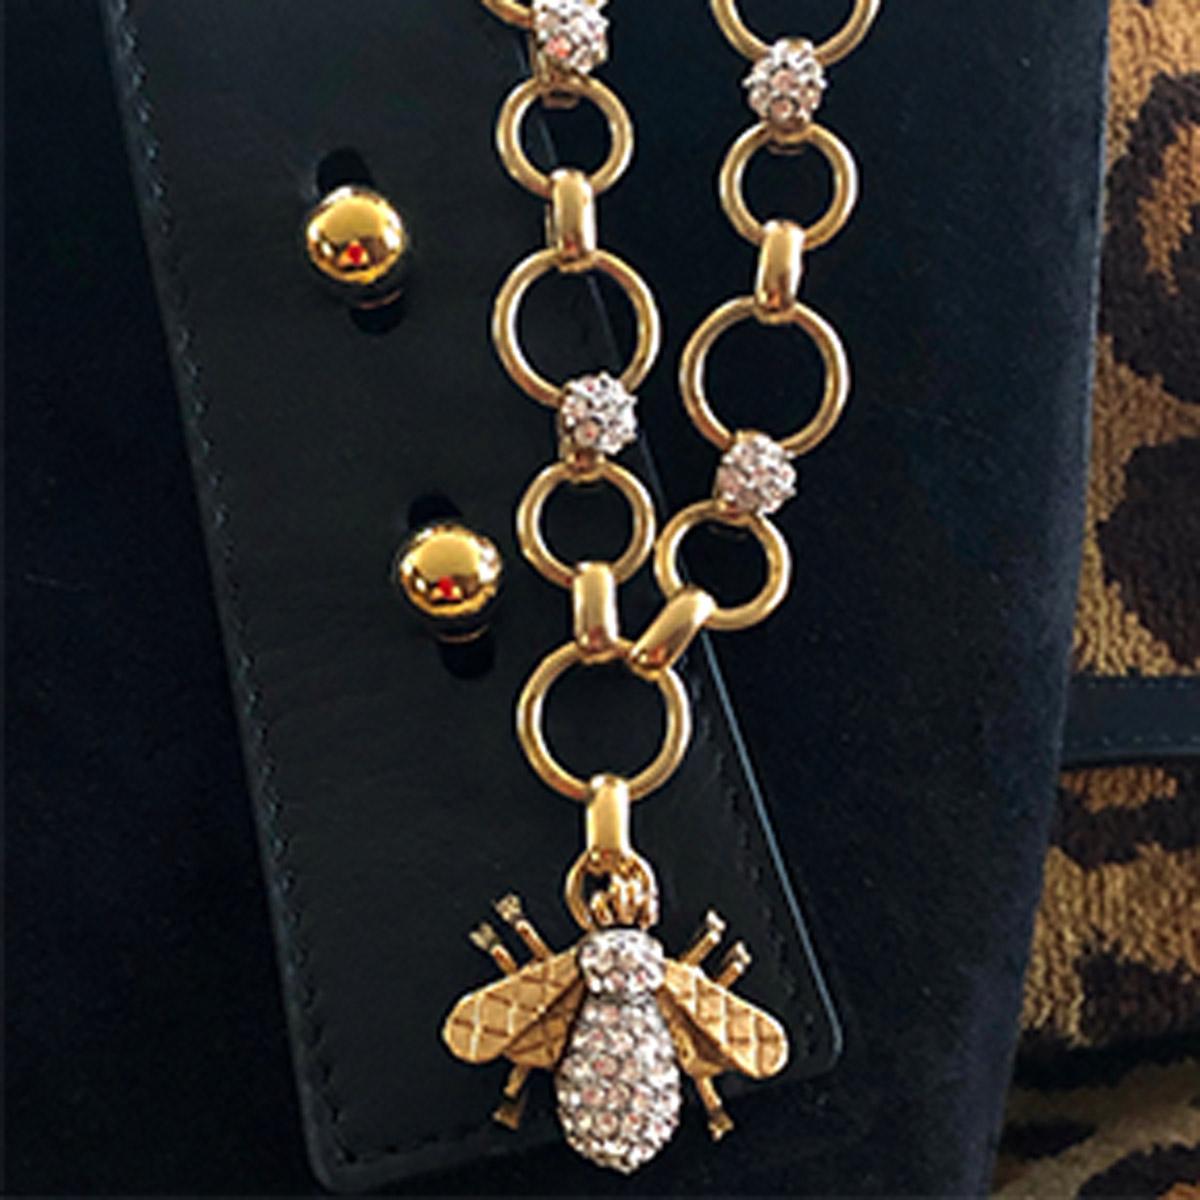 Carolyne Roehm x CINER Crystal Bee Necklace In New Condition For Sale In New York, NY